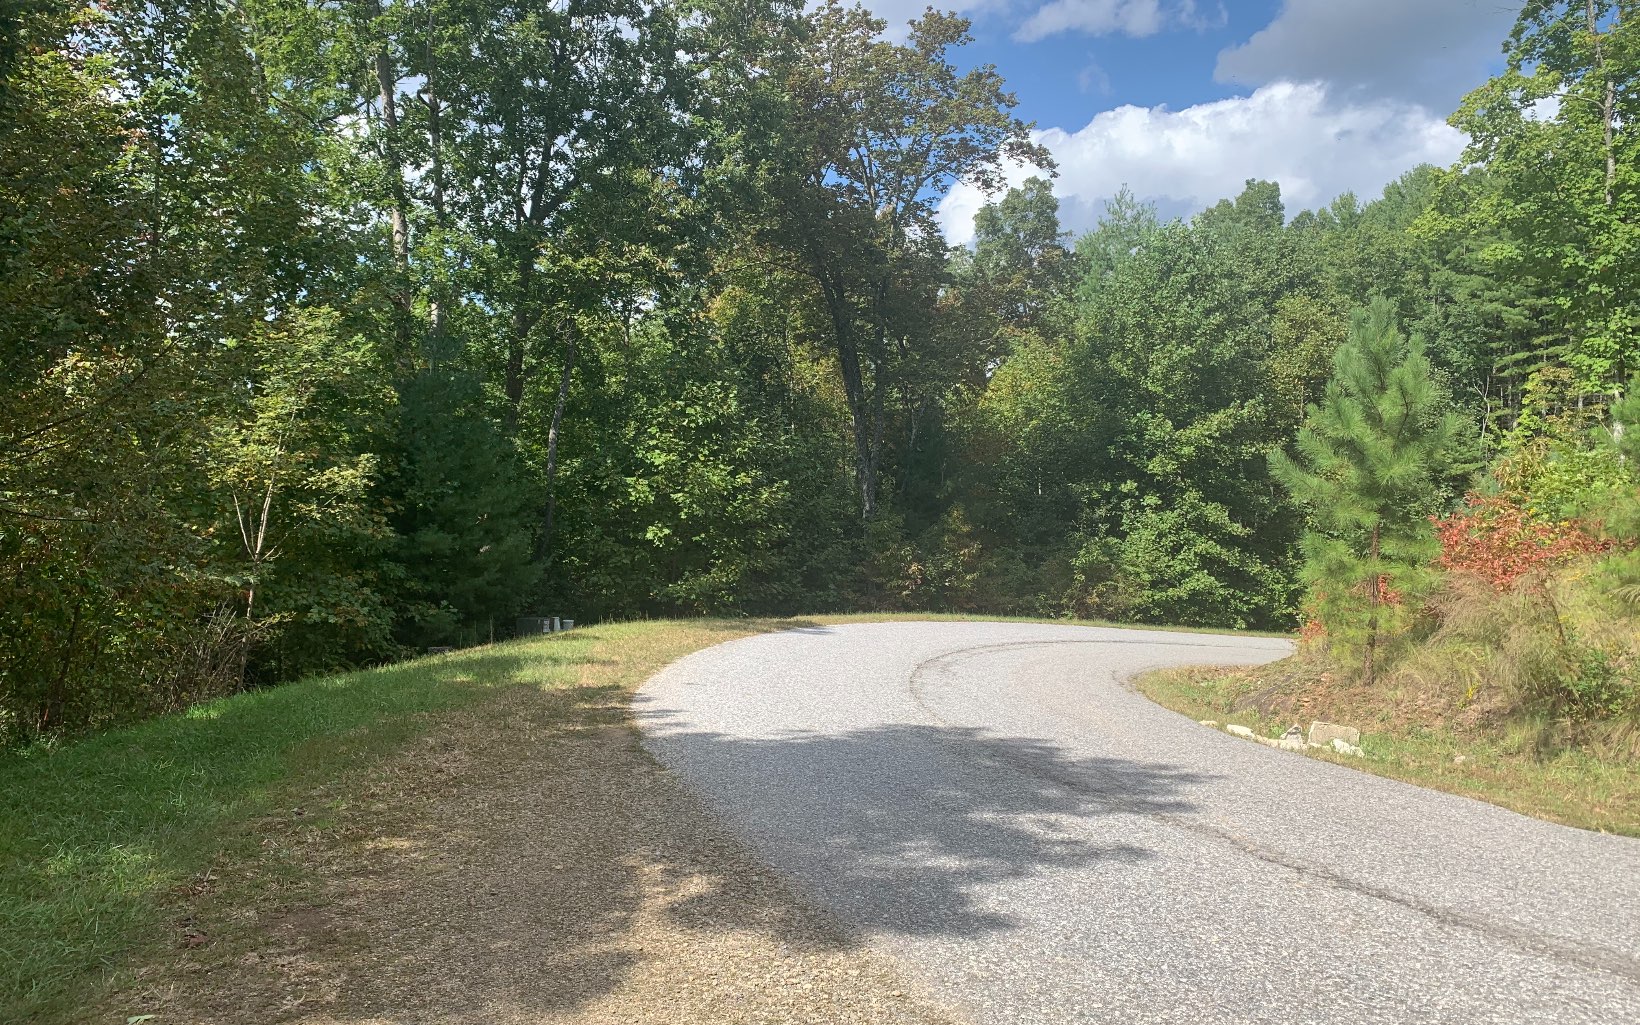 Year round mountain view lot in the beautiful Owltown area of Union County, all paved access, public water, underground power, high-speed fiber optics, come enjoy this upscale mountain community!